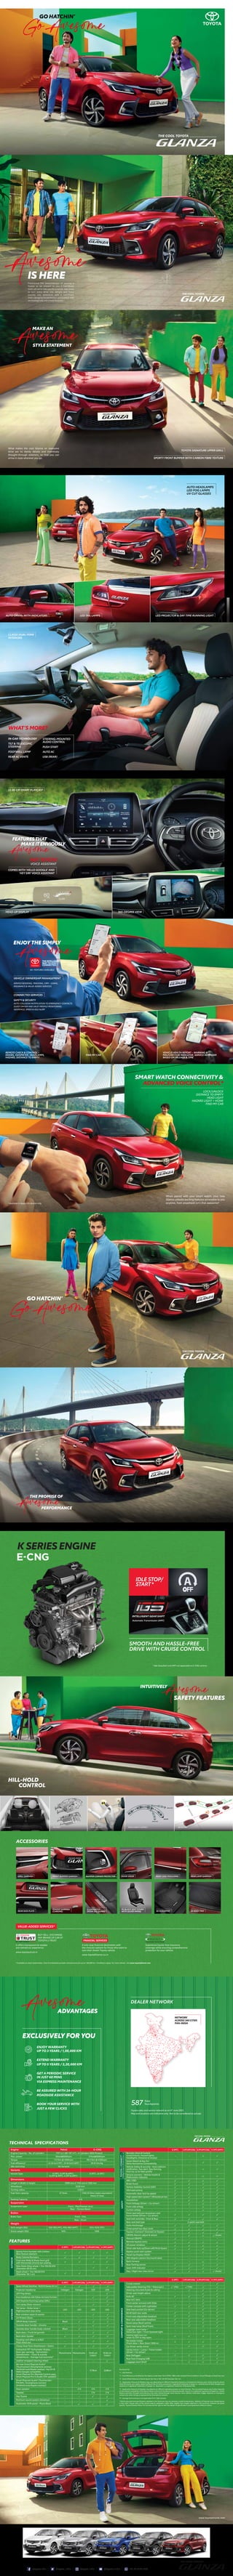 GoAwesome
GO HATCHIN’
Experience the awesomeness of owning a
Toyota as we present to you a hatchback
that's all set to take you by surprise. Get ready
to turn every drive into delight and every
journey into adventure with a hatchback
that’s designed to perfection and loaded with
technologically advanced features.
IS HERE
Awesome
MAKE AN
Awesome
STYLE STATEMENT
What makes the cool Glanza an awesome
drive are its dainty details and inventively
thought-through exteriors, so that you can
arrive in style wherever you go. SPORTY FRONT BUMPER WITH CARBON FIBRE TEXTURE
TOYOTA SIGNATURE UPPER GRILL
AUTO HEADLAMPS
LED FOG LAMPS
UV CUT GLASSES
AUTO ORVMs WITH INDICATORS LED TAIL LAMPS LED PROJECTOR & DAY TIME RUNNING LIGHT
CLASSY DUAL-TONE
INTERIORS
WHAT’S MORE?
IN-CAR TECHNOLOGY
AUTO AC
TILT & TELESCOPIC
STEERING
STEERING-MOUNTED
AUDIO CONTROL
USB (REAR)
FOOTWELL LAMP
REAR AC VENTS
PUSH START
HEAD-UP DISPLAY 360-DEGREE VIEW
22.86 CM SMART PLAYCAST
FEATURESTHAT
MAKE ITENVIOUSLY
Awesome
‘HEY TOYOTA’
VOICE ASSISTANT
COMES WITH 'HELLO GOOGLE' AND
'HEY SIRI' VOICE ASSISTANT
REMOTE CHECK & CONTROL –
DOORS, ODOMETER, HEADLAMPS,
HAZARD, DISTANCE TO EMPTY
FIND MY CAR
VEHICLE HEALTH REPORT – WARNING &
MALFUNCTION INDICATOR, SERVICE REMINDER
BASED ON MILEAGE & TIME
Awesome
ENJOY THE SIMPLY
SERVICE BOOKING, TRACKING, CRM – LOANS,
INSURANCE & VALUE-ADDED SERVICES
VEHICLE OWNERSHIP MANAGEMENT
AUTO COLLISION NOTIFICATION TO EMERGENCY CONTACTS
GUEST DRIVER AND VALET PROFILE MONITORING
GEOFENCE, SPEED & IDLE ALERT
SAFETY & SECURITY
CONNECTED SERVICES
THEINTELLIGENT
WAY TO STAY
CONNECTED
45+ FEATURES AVAILABLE
SMART WATCH CONNECTIVITY &
ADVANCED VOICE CONTROL*
LOCK/UNLOCK
DISTANCE TO EMPTY
HEAD LIGHT
HAZARD LIGHT + HONK
FIND MY CAR
When paired with your smart watch, your new
Glanza unlocks exciting features accessible to you
anytime, from anywhere! Isn’t that awesome?
* Available in Apple iOS devices only.
GoAwesome
GO HATCHIN’
Awesome
THE PROMISE OF
PERFORMANCE
HILL-HOLD
CONTROL
INTUITIVELY
SAFETY FEATURES
Awesome
VEHICLE STABILITY CONTROL
6 AIR BAGS FRONT SEAT PT/FL
www.toyotabharat.com
/ToyotaIndia /Toyota_India /toyota.india /ToyotainIndia +91 40 7178 1588
TECT BODY
B
R
A
K
I
N
G
WITHOUT ABS
WITH ABS
ABS WITH EBD
ACCESSORIES
#
Available at select dealerships. Cost of scheduled periodic maintenance job up to 1,00,000 km. Conditions apply. For more details, visit www.toyotabharat.com
A one-stop ﬁnancial destination with
the choicest options for those who want to
own their dream Toyota vehicle.
www.toyotaﬁnance.co.in
BUY-SELL- EXCHANGE
ANY BRAND OF CAR AT
TOYOTA U TRUST
It oﬀers transparent & reliable
pre-owned car experience.
www.toyotautrust.in
Experience hassle-free insurance
coverage while ensuring comprehensive
protection for your vehicle.
VALUE-ADDED SERVICES#
BUMPER CORNER PROTECTOR
GRILL GARNISH DOOR VISOR REAR LAMP GARNISH
BODY SIDE MOULDING
FRONT BUMPER GARNISH
ILLUMINATED
DOOR SILL GUARD
FENDER GARNISH
(CHROME)
PU BLACK SEAT COVER
WITH SILVER PIPING
REAR SKID PLATE 3D BOOT MAT
3D FLOORMAT
TECHNICAL SPECIFICATIONS
FEATURES
SMOOTH AND HASSLE-FREE
DRIVE WITH CRUISE CONTROL
IDLE STOP/
START*
Automatic Transmission (AMT)
K SERIES ENGINE
Engine Capacity - No. of cylinders 1197 cc (.001 197 m³) - 4 Cylinders (BS6 Phase2)
Max. power 66kw@6000rpm 57kw@6000rpm
Torque 113 Nm @ 4400rpm 98.5 Nm @ 4300rpm
Fuel eﬃciency* 22.35 km/l (MT) , 22.94 km/l (AMT) 30.61 km/kg
Idle start/stop All Variants -
Engine Petrol E-CNG
Variants
Variant Type E (MT), S (MT & AMT), S (MT) , G (MT)
G (MT & AMT), V (MT & AMT)
Kerb weight (KG) 920-955 (MT), 935-960 (AMT) 1015-1035 (MT)
Gross weight (KG) 1410 1450
Suspension type Front - MacPherson strut
Rear - Torsion Beam
Brake Type Front - Disc
Rear - Drum
Dimensions
Suspension
Brakes
Weight
Length X Width X Height 3990 mm X 1745 mm X 1500 mm
Wheelbase 2520 mm
Turning radius 4.85m
Fuel Tank capacity 37 litres CNG 55 litres (water equivalent)
Petrol 37 litres
Seating Capacity 5 N
E (MT) S (MT/AMT/CNG) G (MT/AMT/CNG) V (MT/AMT)
Sporty Front bumper with Carbon
ﬁbre Texture element
Body Colored Bumpers
Cool new Wide & Sharp front grill
with Horizontal chrome bar plating
New Sleek Alloy wheel + Tire 195/55 R16
(Diameter 40.64 cm) - -
Steel wheel + Tire 185/65 R15
(Diameter 38.1 cm) - -
EXTERIOR
Disclaimer for
*1 - VDA Method.
*2 - Fuel Eﬃciency as Certiﬁed by Test Agency under Rule 115 of CMVR, 1989 under standard Test Conditions, Actual Mileage on Road may vary.
*3 - Spare Wheel Material is Steel & Spare Tyre Size is 185 / 65 R15 Diameter 38.1 cm.
*4 - Application Features & Displays may vary depending on diﬀerent Operating Systems or Smartphone Devices used. Avoid using the phone
while driving for your safety. Apple CarPlay & Hey Siri Voice assistance is registered trademark of Apple Inc. Android Auto & Hello Google voice
assistance is registered Trademark of Google Inc. Bluetooth is a registered Trademark of Bluetooth SIG.
*5 - Application features of displays may depend on diﬀerent operating systems or smart Devices. The connected feature also further depends
on the network availability of the device ﬁtted on the car & Smartphone network provider. Hey Siri is a trademark registered of Apple Inc. Unlock
feature execution through smart devices only when locked through smart devices. Auto collision notiﬁcation trigger depends on emergency
contact only when Airbag is deployed & the Smartphone network.
*6 - Average fuel economy is not applicable for E-CNG variants.
* Vehicle pictured and speciﬁcations detailed in this brochure may vary between models & equipment. Addition of Features may change ﬁgures
in this chart. Actual color of the vehicle body & upholstery might diﬀer slightly from images depicted in this brochure. Features are grade
speciﬁc. Toyota Kirloskar Motor Pvt Ltd reserves the right to alter the details of speciﬁcations and equipment without a notice.
* Idle Stop/Start and AMT not applicable to E-CNG variants.
E (MT) S (MT/AMT/CNG) G (MT/AMT/CNG) V (MT/AMT)
Spare Wheel (SteelWheel–185/65R15Diameter38.1cm)
Projector headlamp Halogen Halogen LED LED
LED Fog lamps ‐ ‐ ‐
Auto headlamps with follow me home function ‐ ‐
LED Daytime Running Lamp (DRL) ‐ ‐ ‐
Turn lamp (Door mirrors) ‐
Tail lamp + Brake lamp +
Highmounted stop lamp
LED LED LED LED
Rear window wiper & washer ‐ ‐
UV Protect Glass ‐ ‐ ‐
ORVM Body Colored Black
Outside door handle - chrome ‐ ‐
Outside door handle body colored Black ‐ ‐
Back door / Trunk lid garnish ‐ ‐
Back door Spoiler
Floating roof eﬀect w A/B/C
Pillar black out
‐
Classy Dual Tone (Dashboard + Seats)
Interactive TFT Tachometer display -
Door ajar warning - Tachometer -
Speedometer - Clock & outside
temperature - Average fuel economy*
Leather wrapped steering wheel ‐ - -
All-new Smart Playcast Audio*
(Touchscreen) [Smartphone connect
(Android auto/Apple carplay), Hey Siri &
Hello Google compatible,
Smart Playcast Pro (Remote Control app),
Smart Playcast Pro S (Audio OTA update)]
Smart Playcast Audio* [Touchscreen
FM/AM/, Smartphone connect
(Android auto/Apple carplay)]
‐ ‐ ‐
Door speaker ‐ 4 N 4 N 4 N
Tweeter ‐ - 2 N 2 N
Hey Toyota ‐ -
Premium sound system (Arkamys) ‐ ‐ ‐
Automatic Shift panel - Piano Black ‐
EXTERIOR
INTERIOR
- - 17.78cm 22.86cm
Monochrome Monochrome 10.66 cm 10.66 cm
(color) (color)
E (MT) S (MT/AMT/CNG) G (MT/AMT/CNG) V (MT/AMT)
Cruise control ‐ ‐ ‐
Adjustable Steering (Tilt + Telescopic) (Tilt) (Tilt)
Steering mounted Audio & calling ‐
Driver seat height adjust ‐ ‐
Auto AC
Rear A/C Vent ‐ ‐
Front center armrest with Slide - -
Center console with cupholder
Seat back pocket (Co-driver) - -
60:40 Split rear seats
Front seat adjustable headrest
Rear seat adjustable headrest
Room lamp (Roof centre)
Spot map lamp (Roof front) ‐
Luggage room lamp +
Glove box light + Front footwell light
‐ ‐
Interior light turn-on
when IG OFF or Key open
Pet bottle holder
(Front door + Rear Door) 1000 ml
Co-Driver vanity mirror ‐
Vanity mirror + Lamp + Ticket holder
(Driver + Co-driver)
‐ ‐ ‐
Rear Defogger
Rear Fast Charging USB - -
Luggage room Shelf ‐
COMFORT
&
CONVENIENCE
E (MT) S (MT/AMT/CNG) G (MT/AMT/CNG) V (MT/AMT)
Remote check & Control
(Lock/Unlock, Hazard lights,
Headlights, Distance to empty)
- -
Smart Watch & Hey Siri
Voice Assistance Compatibility
‐ ‐
Vehicle Safety & security - Auto collision
notiﬁcation, Tow alert, Geo fencing,
Find my car & Valet proﬁle
‐ ‐
Service connect - Vehicle health &
Malfunction indicator
‐ ‐
ABS / EBD
Brake Assist
Vehicle Stability Control (ESP)
Hill hold control
Automatic door lock by speed
High speed alert system* (>80kilometerperhour)
Immobilizer
Front Airbags (Driver + Co-driver)
Front side airbag ‐ ‐
Curtain airbag ‐ ‐
Front seat belt pre-tensioners and
Force limiter (Driver + Co-driver)
Seat belt reminder- Front & Rear
Rear seat belt type 3-point seat belt
TOYOTA
i-CONNECT*
-
SAFETY
COMFORT
&
CONVENIENCE
Intelligent
way
to
connect
to
your
car
Isoﬁx Anchorage
Child-proof rear door locks
Toyota i-Connect* (Connect to Toyota)
ORVMs Electric adjust & retract - (Auto)
Manual ORVMS ‐ ‐ -
Remote keyless entry
All power windows
Driver side Auto up/Down with Pinch Guard
Keyless push start system ‐ ‐
Head-Up Display (HUD) ‐ ‐ ‐
360-degree camera (Surround view) ‐ ‐ ‐
Back Camera ‐ ‐ ‐
Rear Parking sensor
Gear shift indicator
Day / Night rear view mirror (Auto)
EXCLUSIVELY FOR YOU
ENJOY WARRANTY
UP TO 3 YEARS / 1,00,000 KM
EXTEND WARRANTY
UP TO 5 YEARS / 2,20,000 KM
GET A PERIODIC SERVICE
IN JUST 60 MINS
VIA EXPRESS MAINTENANCE
BE ASSURED WITH 24-HOUR
ROADSIDE ASSISTANCE
BOOK YOUR SERVICE WITH
JUST A FEW CLICKS
DEALER NETWORK
Toyota sales and service network as on 6th
June 2023.
Map and locations are indicative only. Not to be considered as actuals.
Awesome
ADVANTAGES
Total
Touchpoints
587
NETWORK
ACROSS 340 CITIES
PAN-INDIA
THE COOL TOYOTA
THE COOL TOYOTA
THE COOL TOYOTA
THE COOL TOYOTA
THE COOL TOYOTA
 